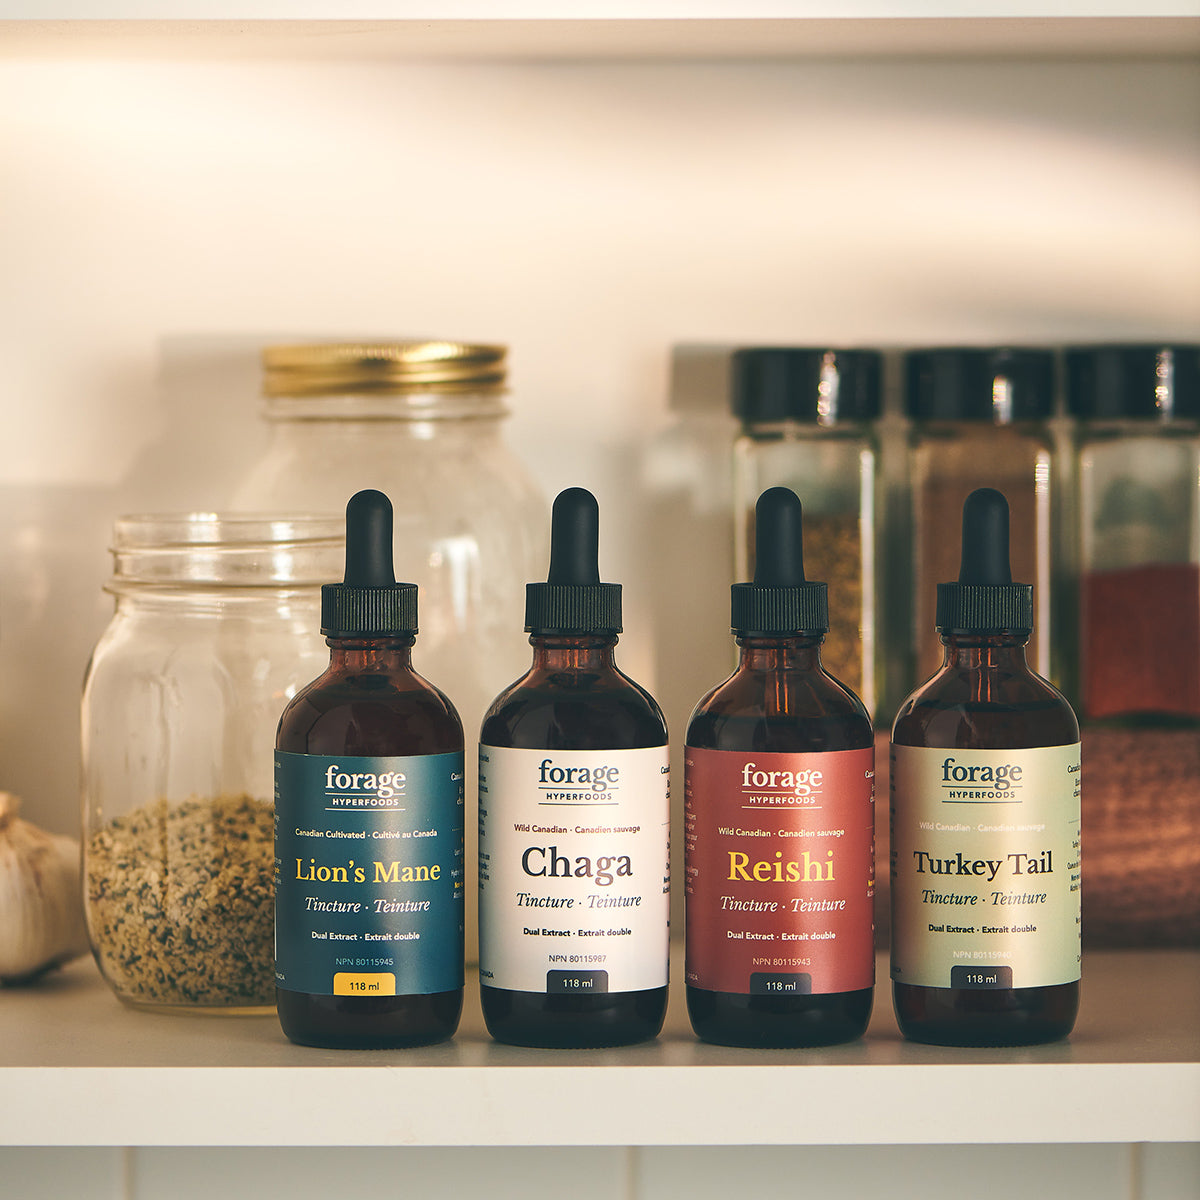 The Forager Set in the Alcohol-Free Format. It includes 4 bottles and tinctures- Chaga, Reishi, Turkey Tail and Lion’s Mane. They’re in a 118 ml format. They are positioned in an everyday cabinet, with various spices in the background.